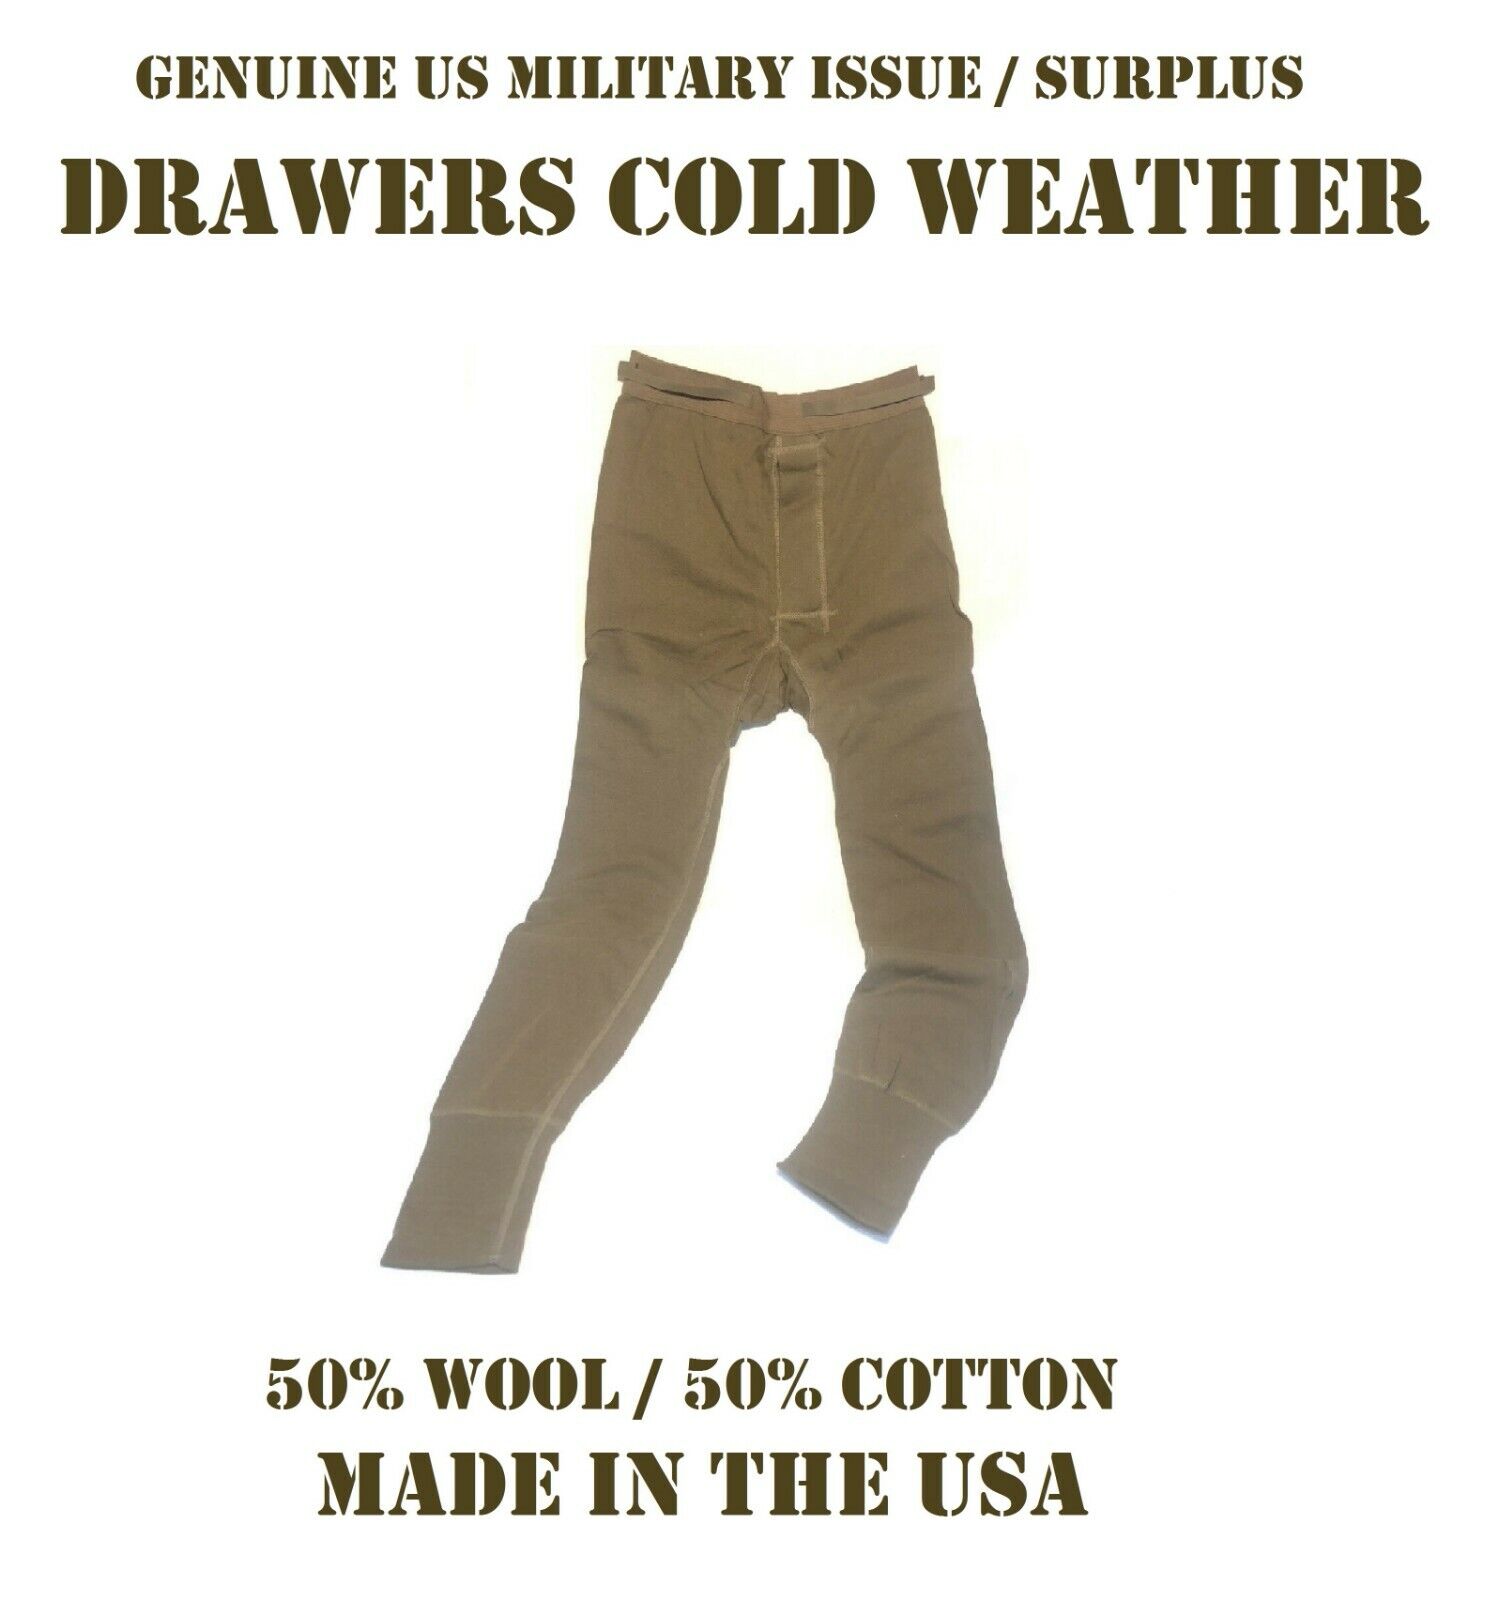 US MILITARY EARLY ECWCS THERMAL DRAWERS COLD WEATHER MEN\'S XS 50/50 COTTON WOOL